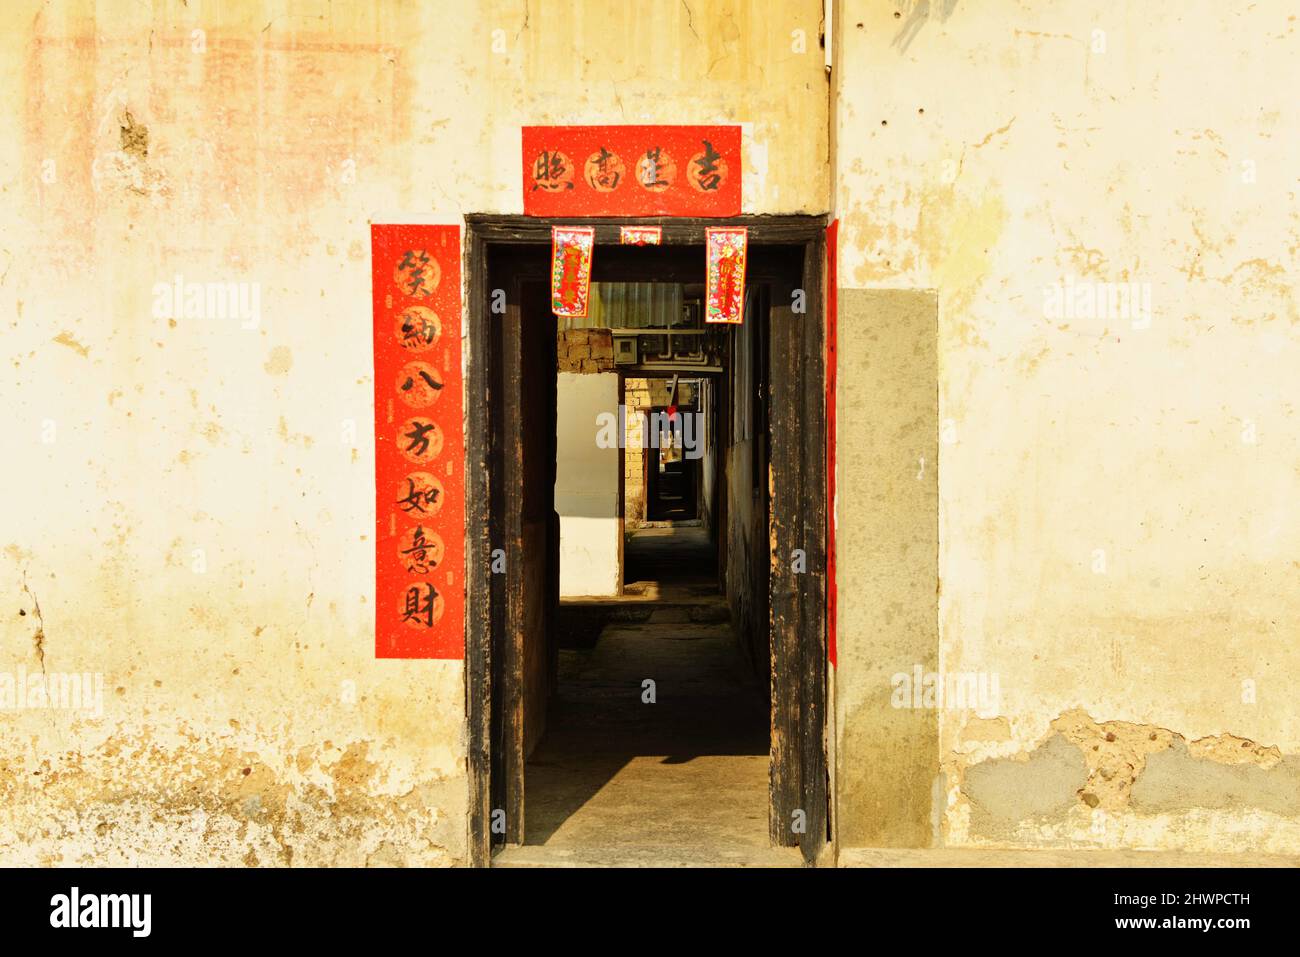 Hezhou, Hezhou, China. 7th Mar, 2022. A Hakka Round House in Rinchong Village, Liantang Town, Babu District, Hezhou City, Guangxi Province, taken on March 5.Jiang's ancestral house, located in Rinchong Village, Liantang Town, Babu District, Hezhou City, Guangxi Province, was built in the Qing Dynasty and has a history of more than 200 years. It is a typical Hakka Round House in East Guizhou. The Round House covers an area of more than 30 acres. The building is a square symmetrical structure, surrounded by a 3-meter-high wall and separated from the outside world. The layout of the buildings, Stock Photo